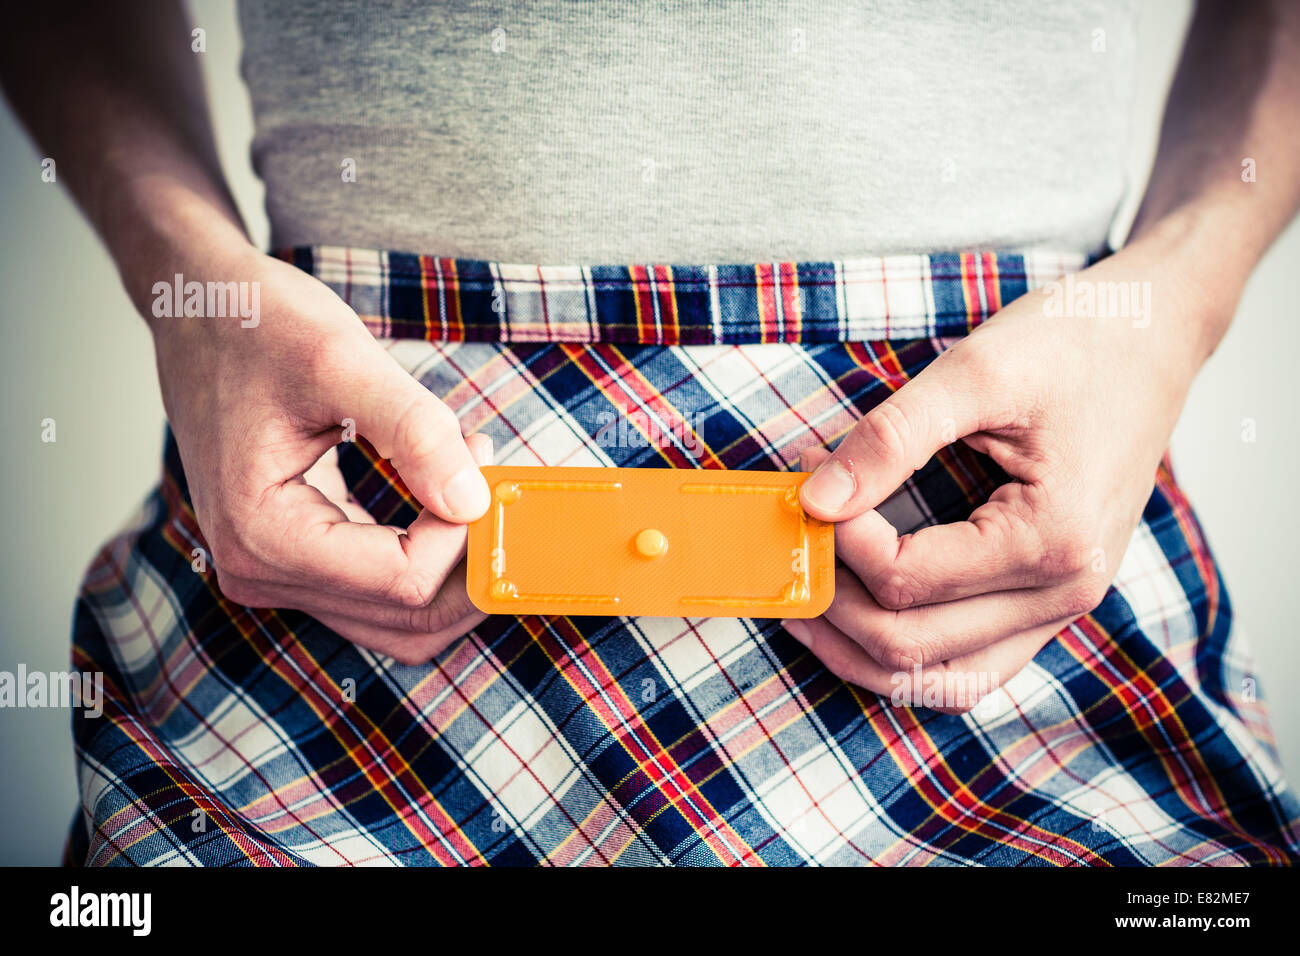 Norlevo ® morning-after pill (emergency contraceptive pill). Stock Photo